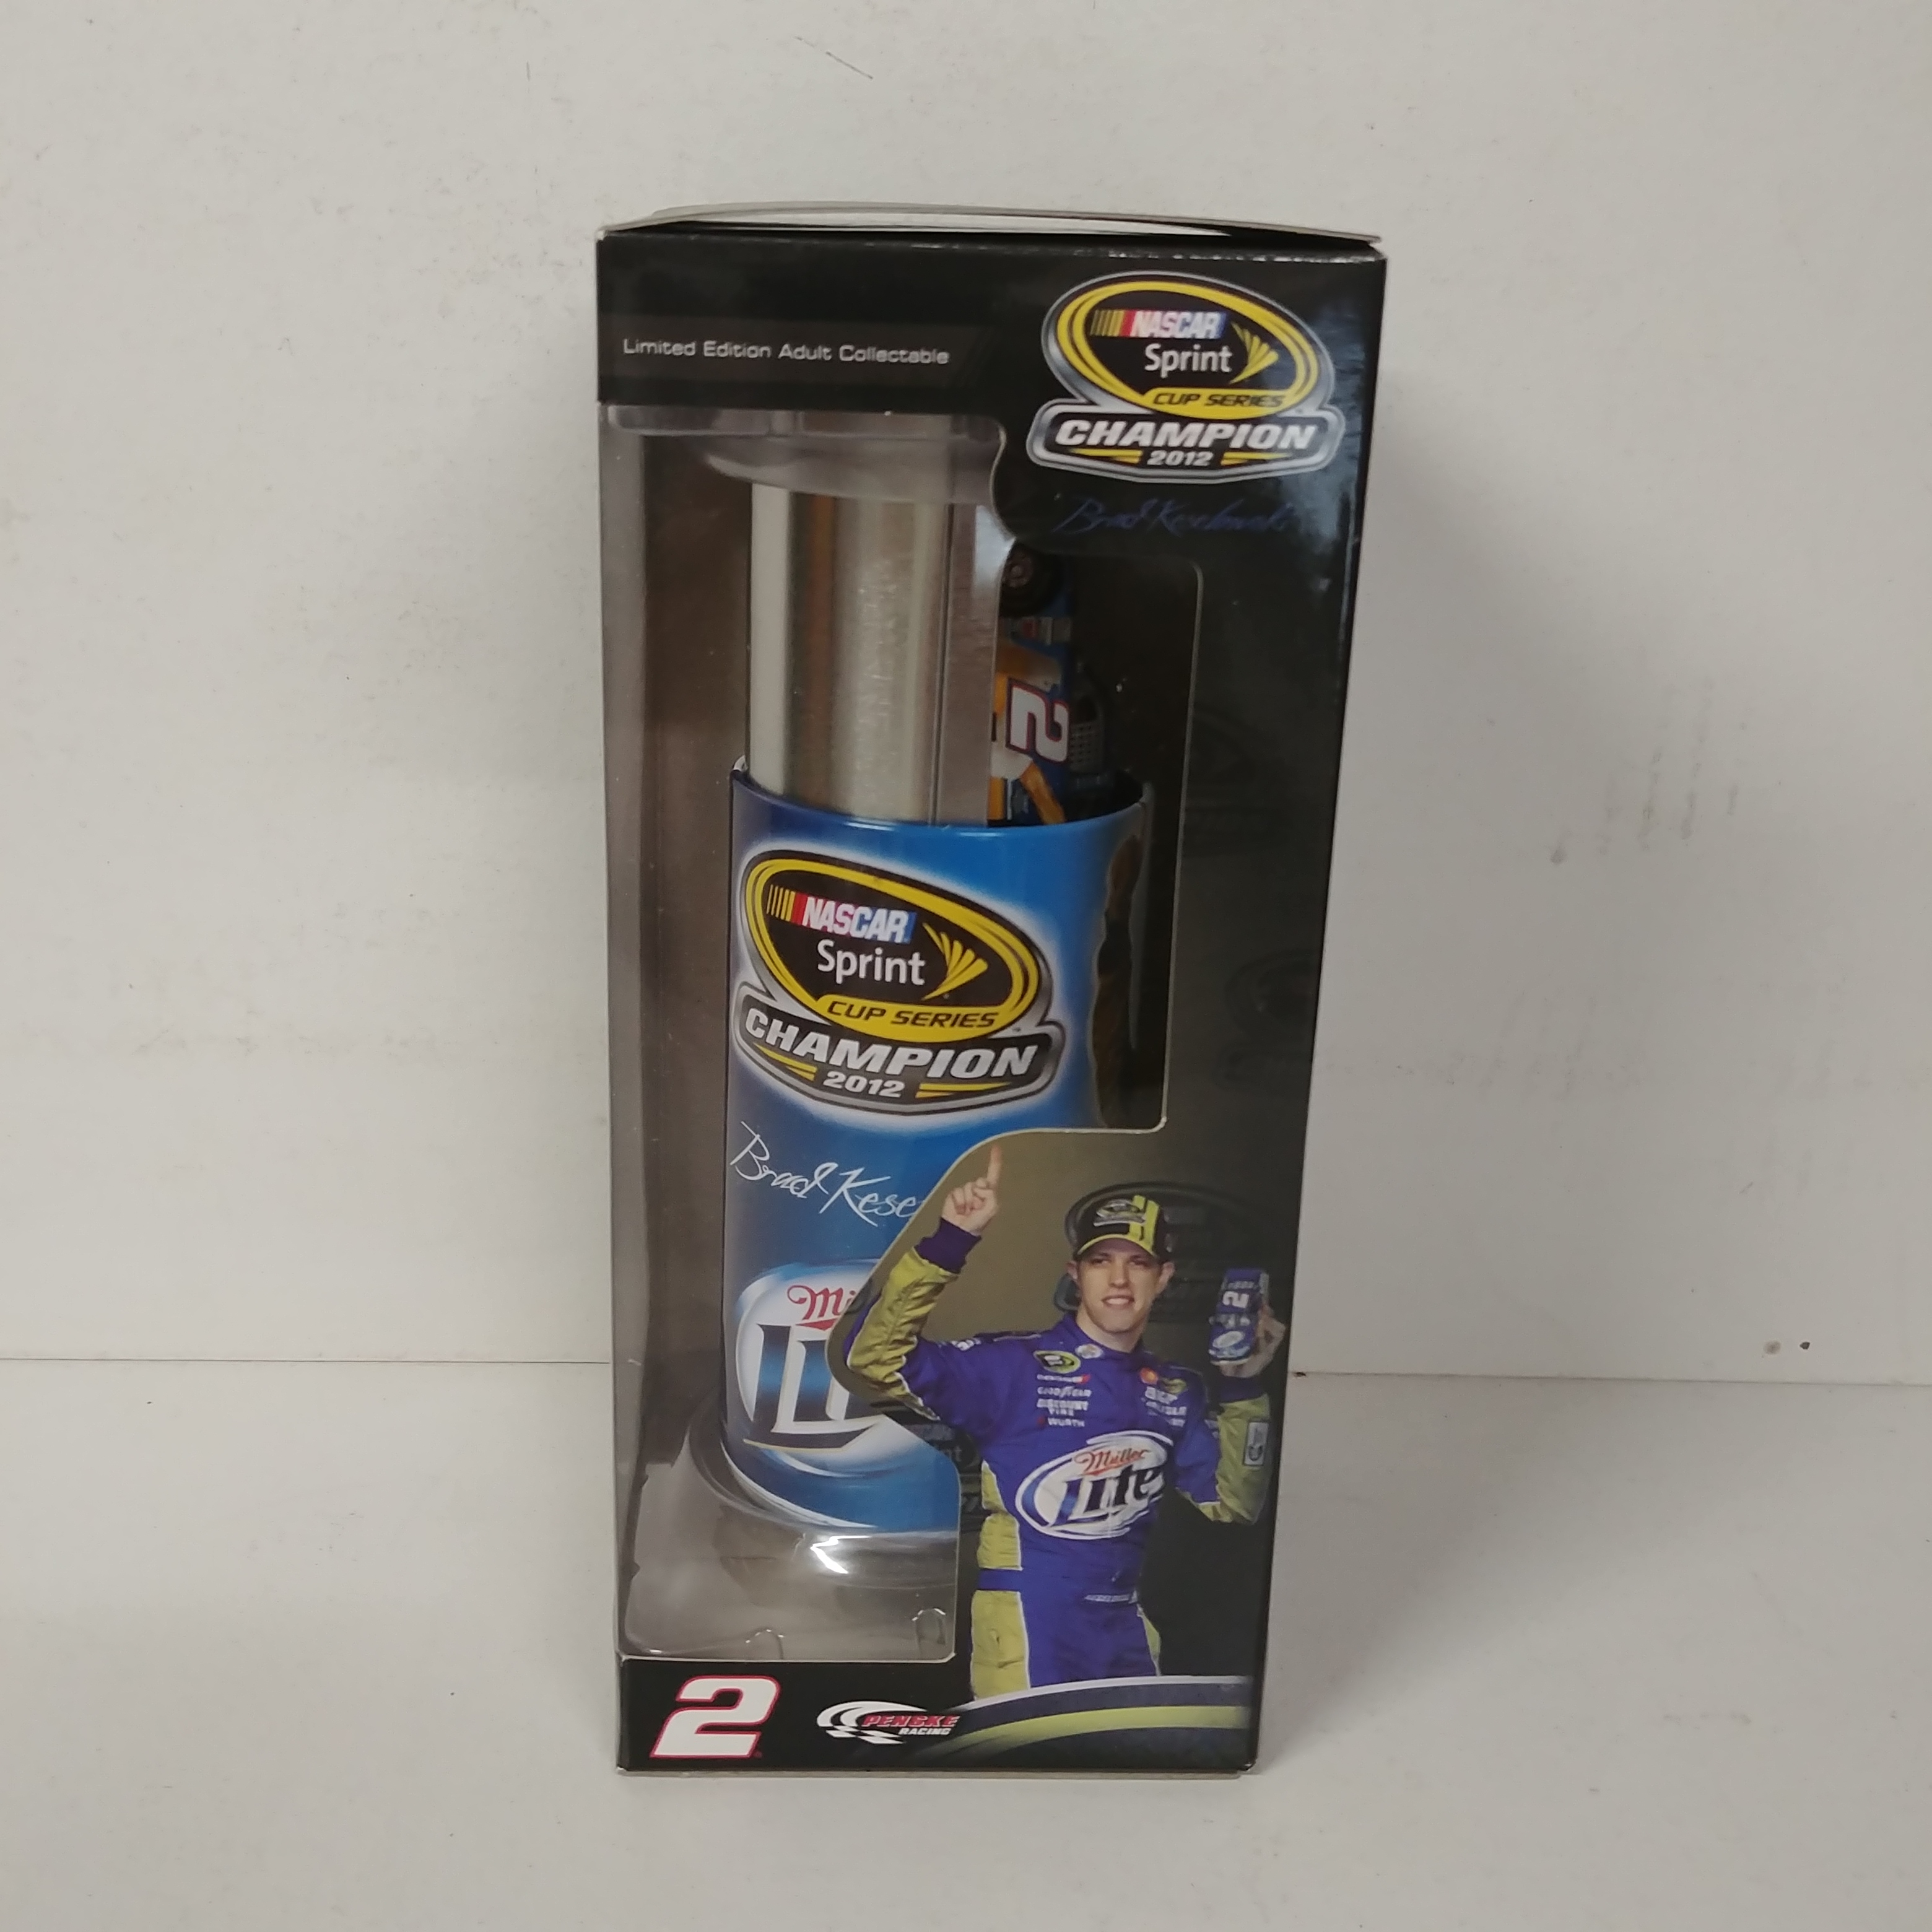 2012 Brad Kesekowski 1/64th Miller Lite "Sprint Cup Champion" Pitstop Series car in can